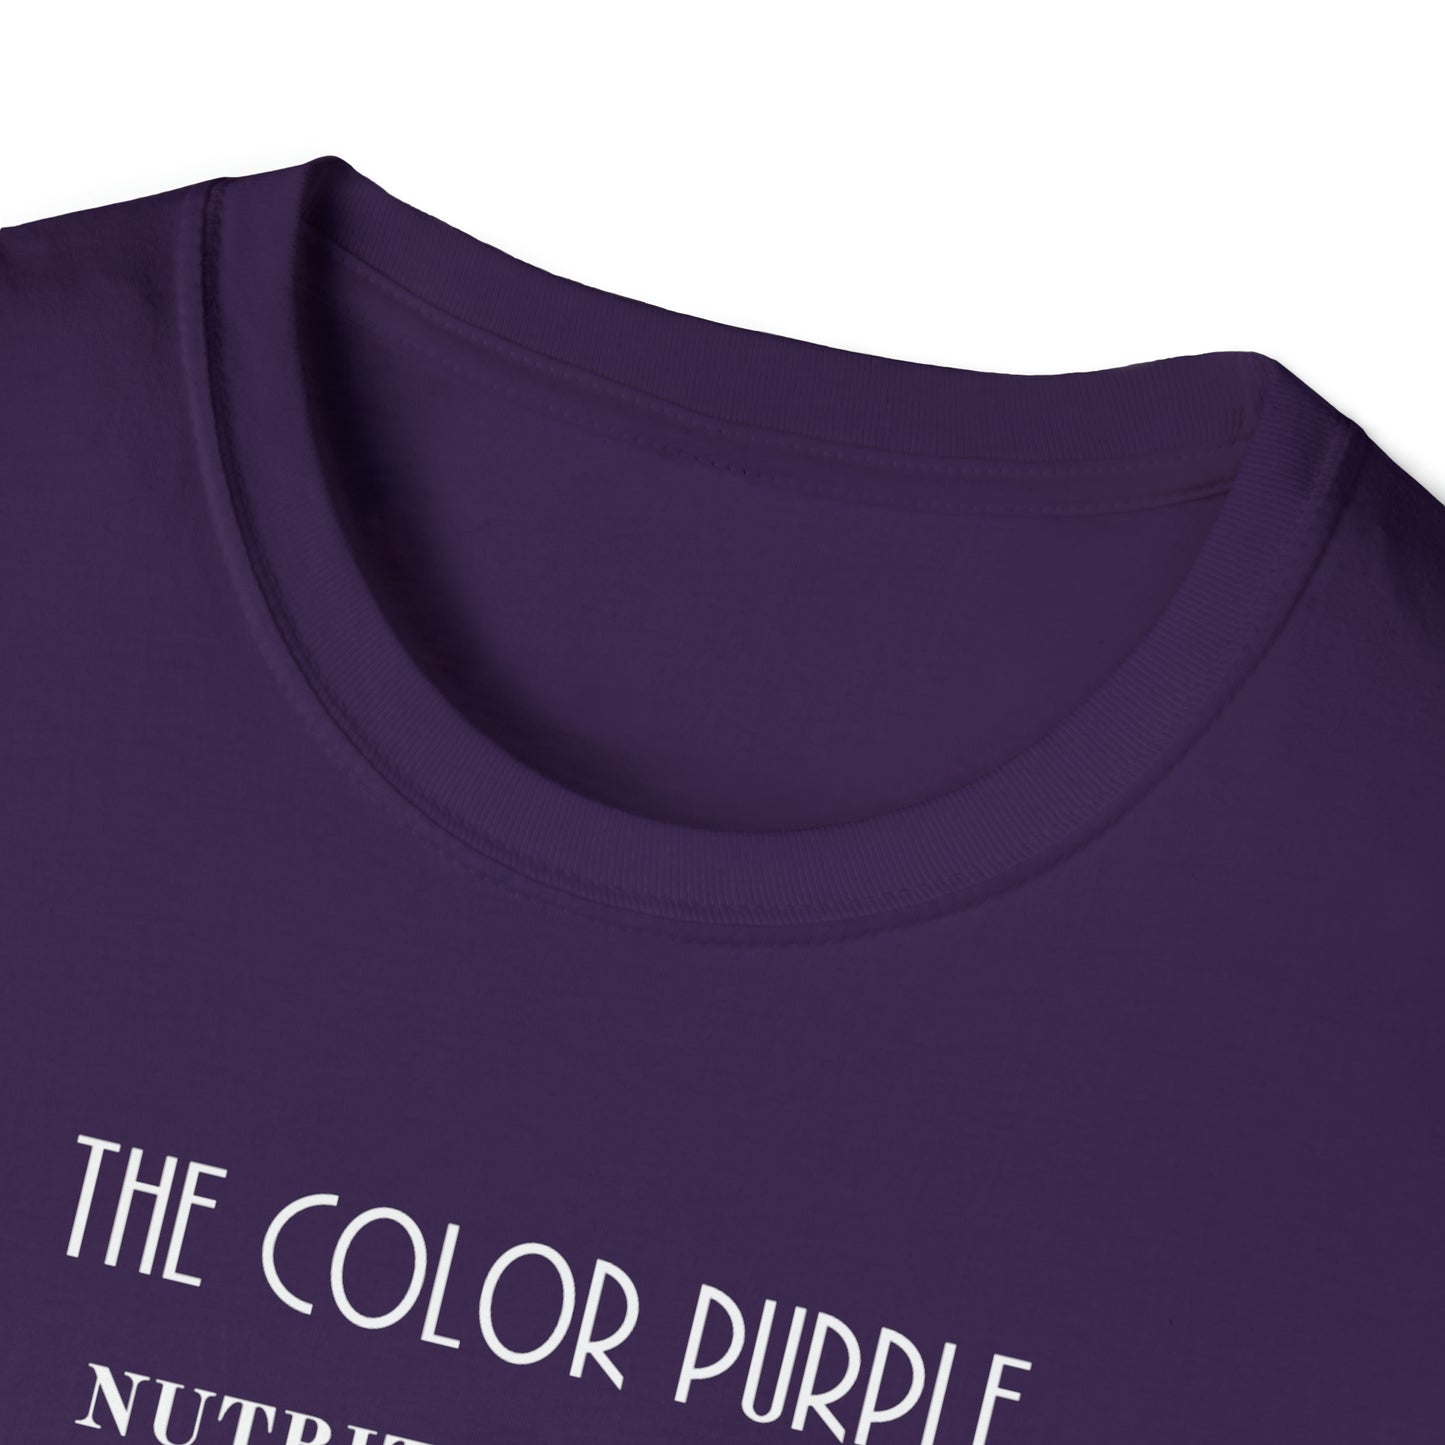 THE COLOR PURPLE Unisex Softstyle T-Shirt